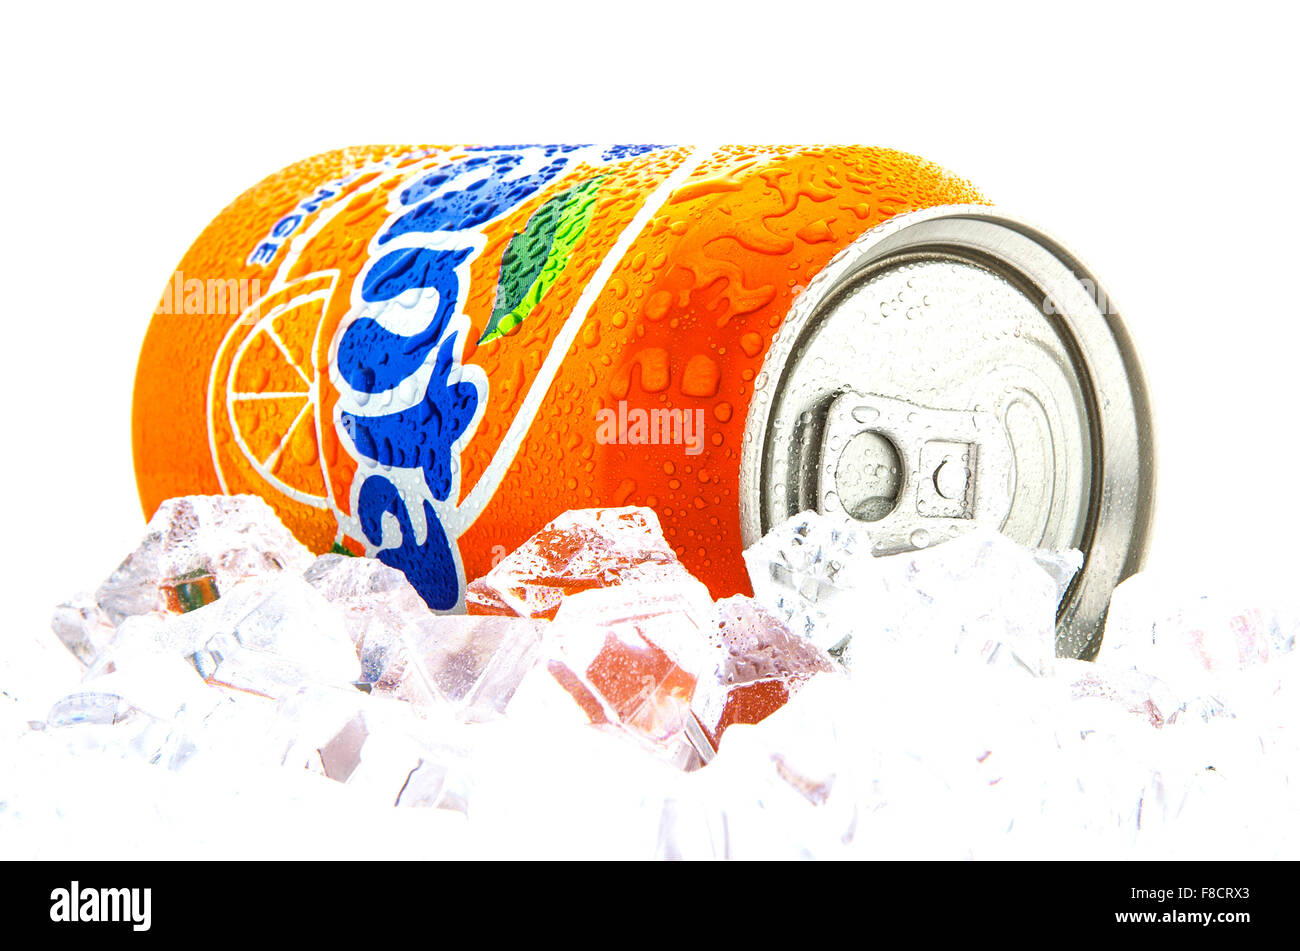 Fanta Icy Orange on a bed of ice over white background Stock Photo